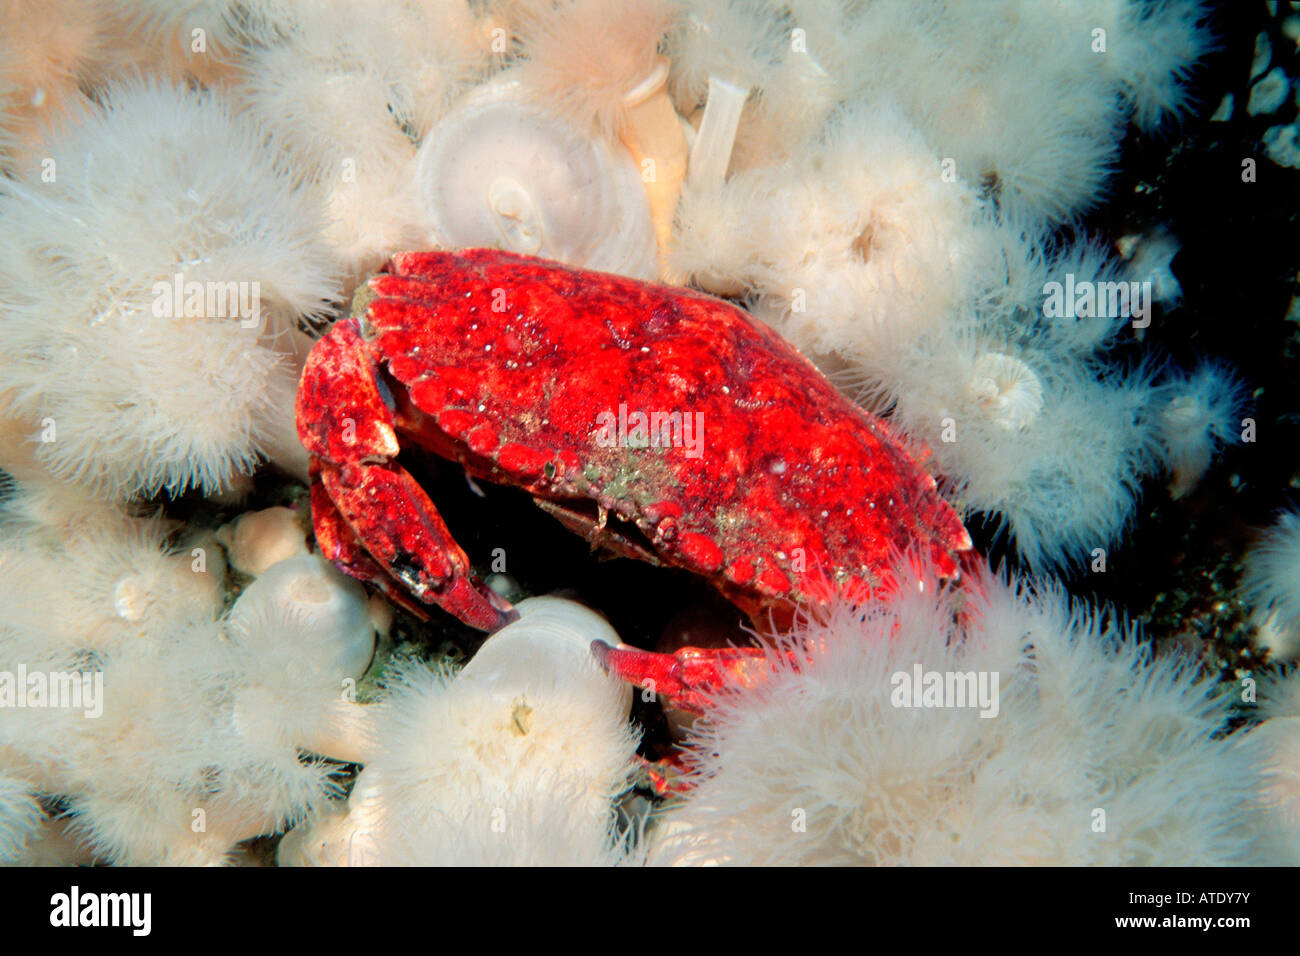 Red rock crab Cancer productus British Columbia Pacific Ocean Stock Photo